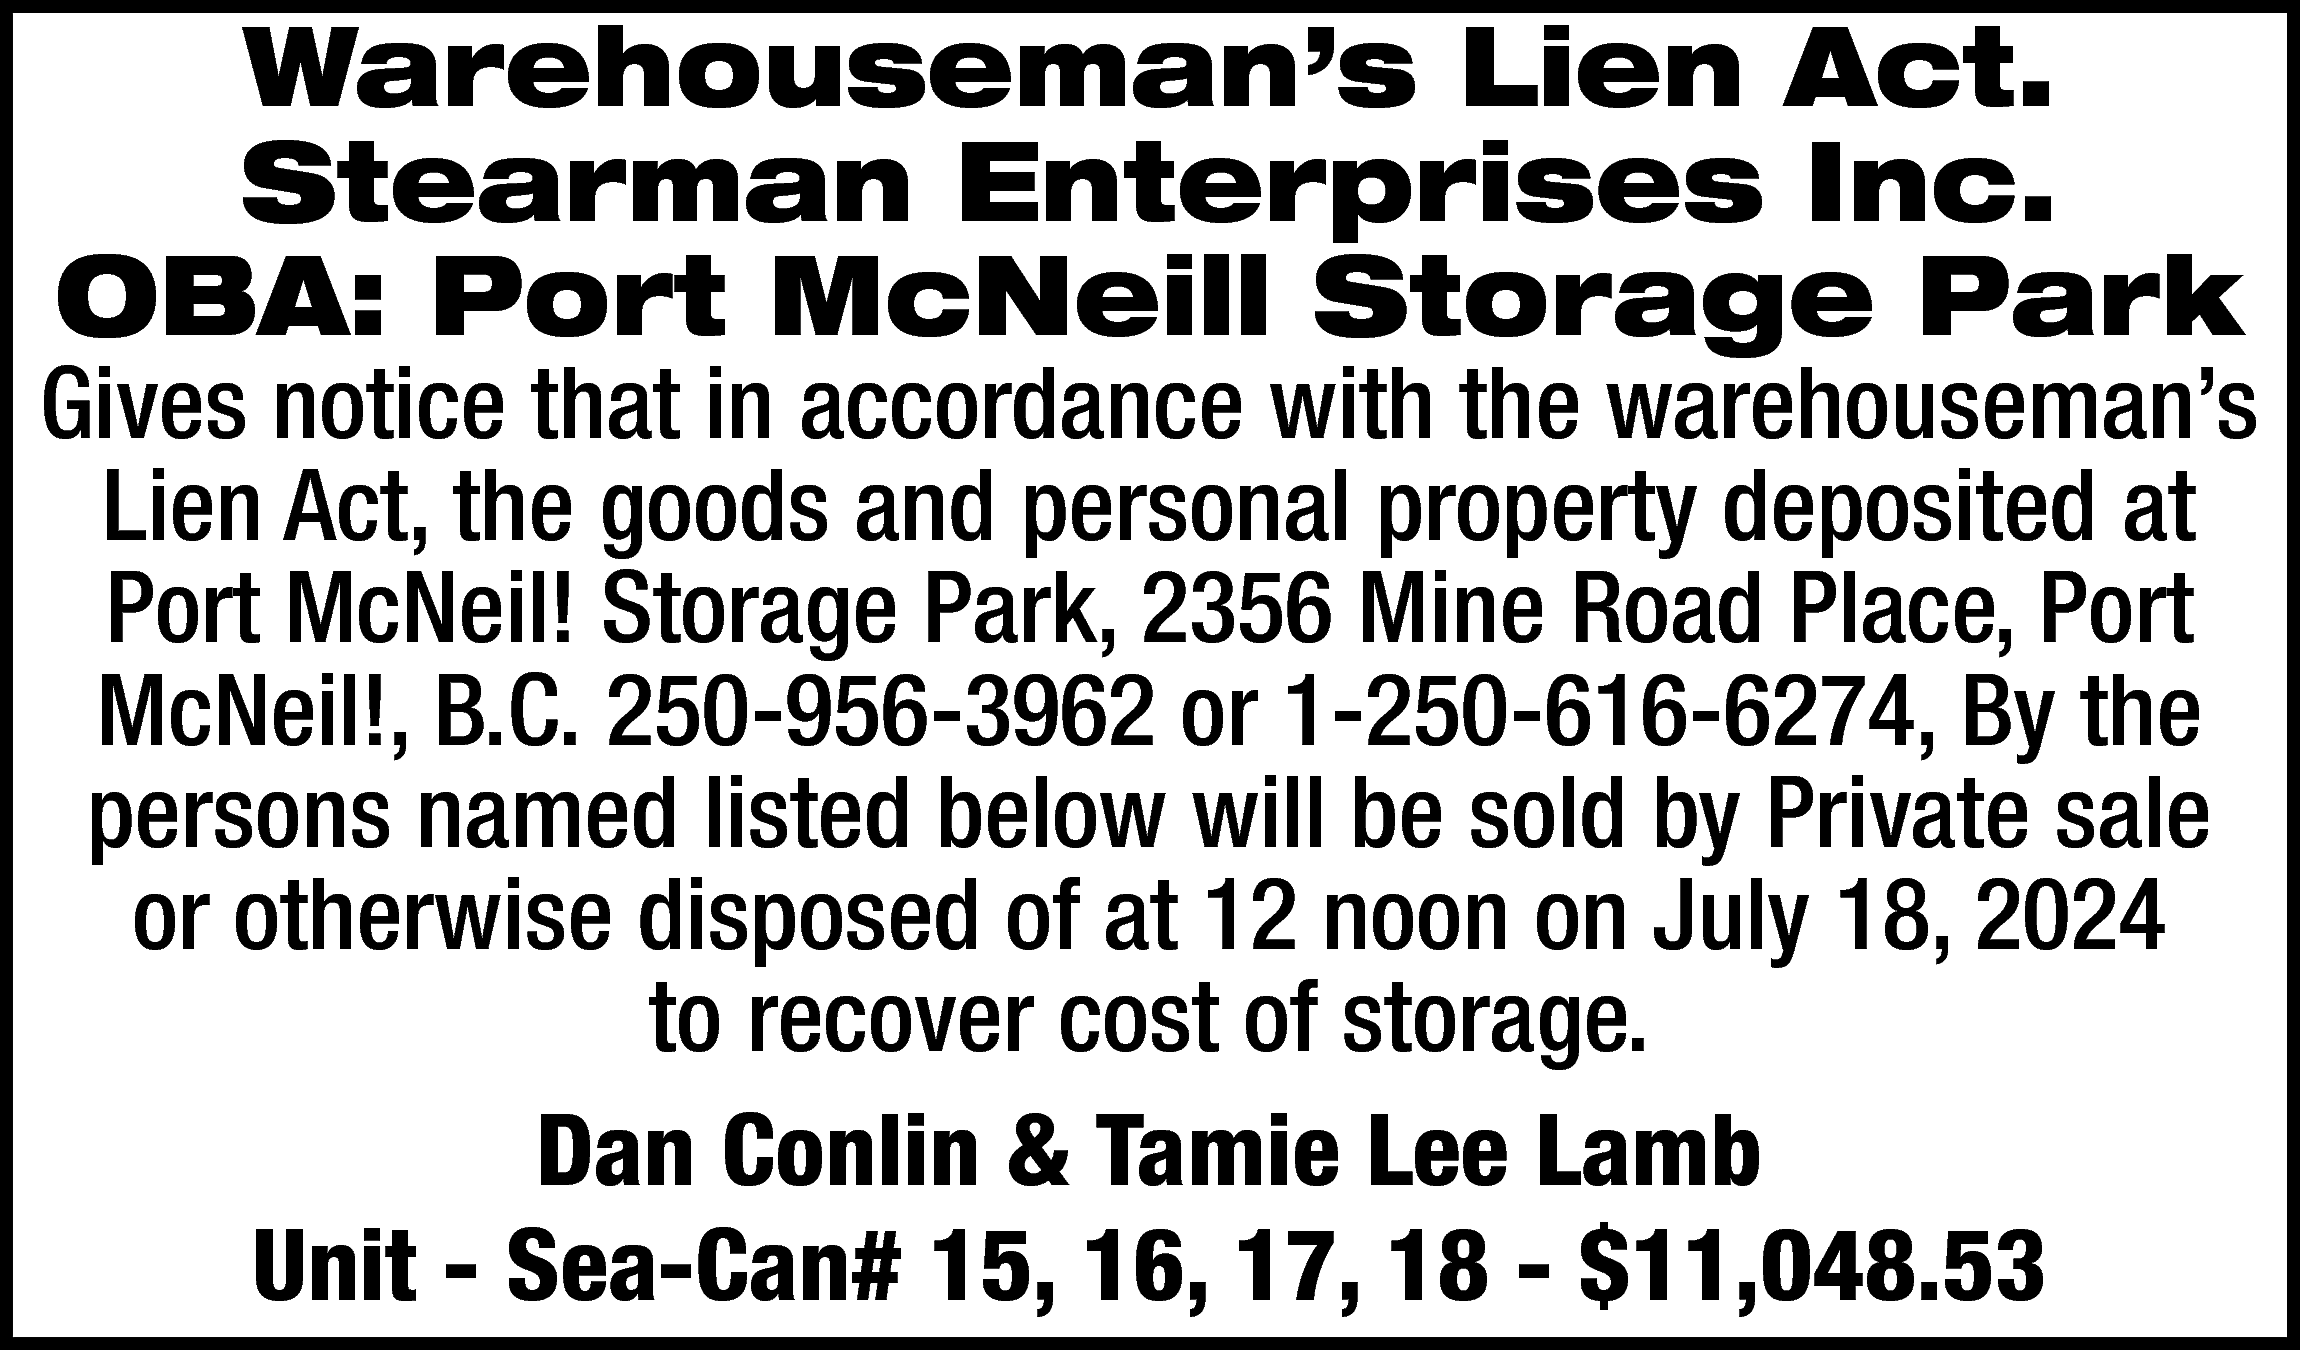 Warehouseman’s Lien Act. <br>Stearman Enterprises  Warehouseman’s Lien Act.  Stearman Enterprises Inc.  OBA: Port McNeill Storage Park    Gives notice that in accordance with the warehouseman’s  Lien Act, the goods and personal property deposited at  Port McNeil! Storage Park, 2356 Mine Road Place, Port  McNeil!, B.C. 250-956-3962 or 1-250-616-6274, By the  persons named listed below will be sold by Private sale  or otherwise disposed of at 12 noon on July 18, 2024  to recover cost of storage.  Dan Conlin & Tamie Lee Lamb  Unit - Sea-Can# 15, 16, 17, 18 - $11,048.53    